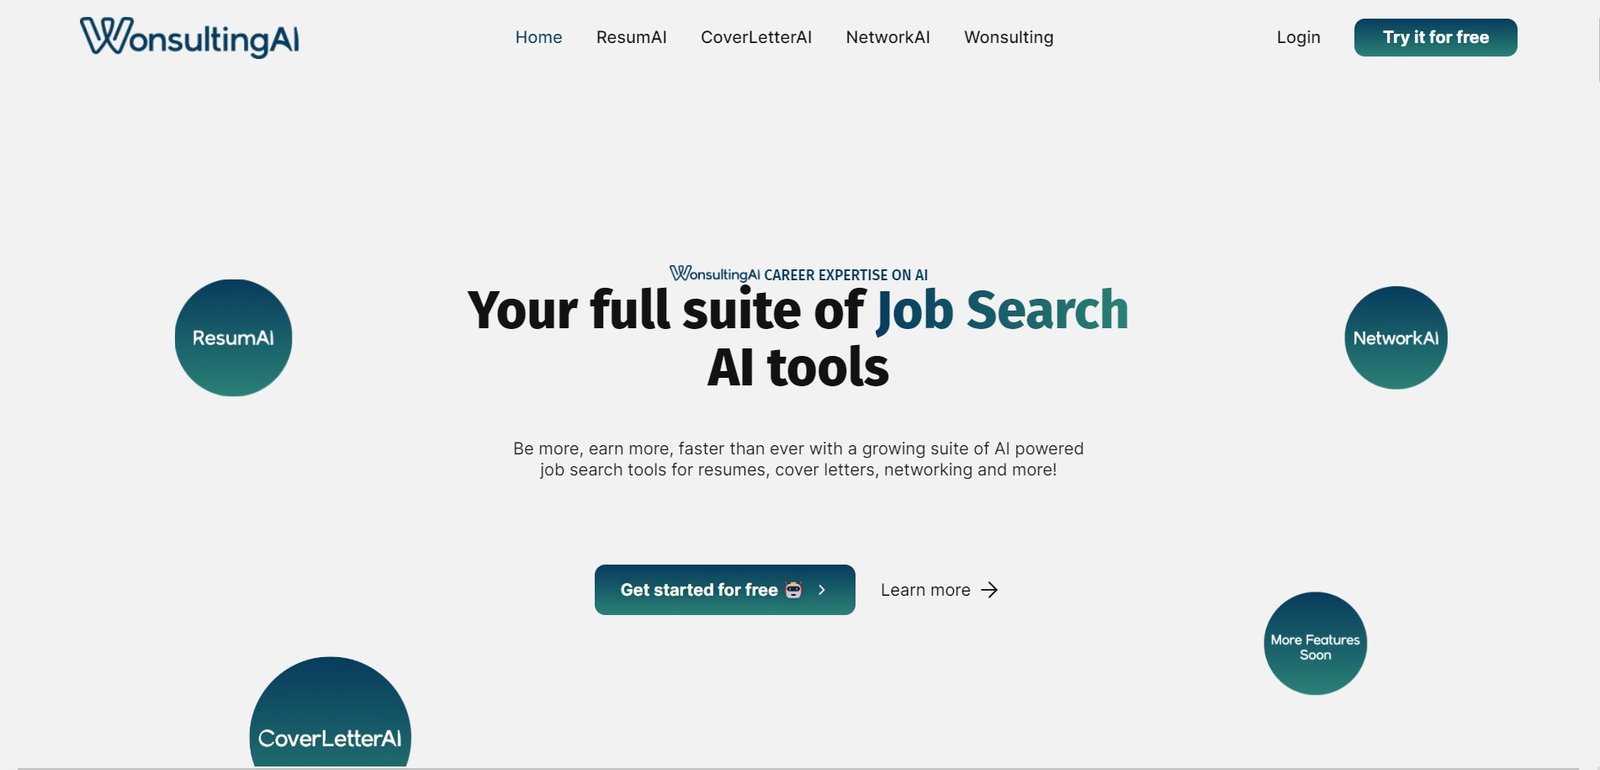 Wonsulting is an AI-powered job search suite to help job seekers enhance their resumes